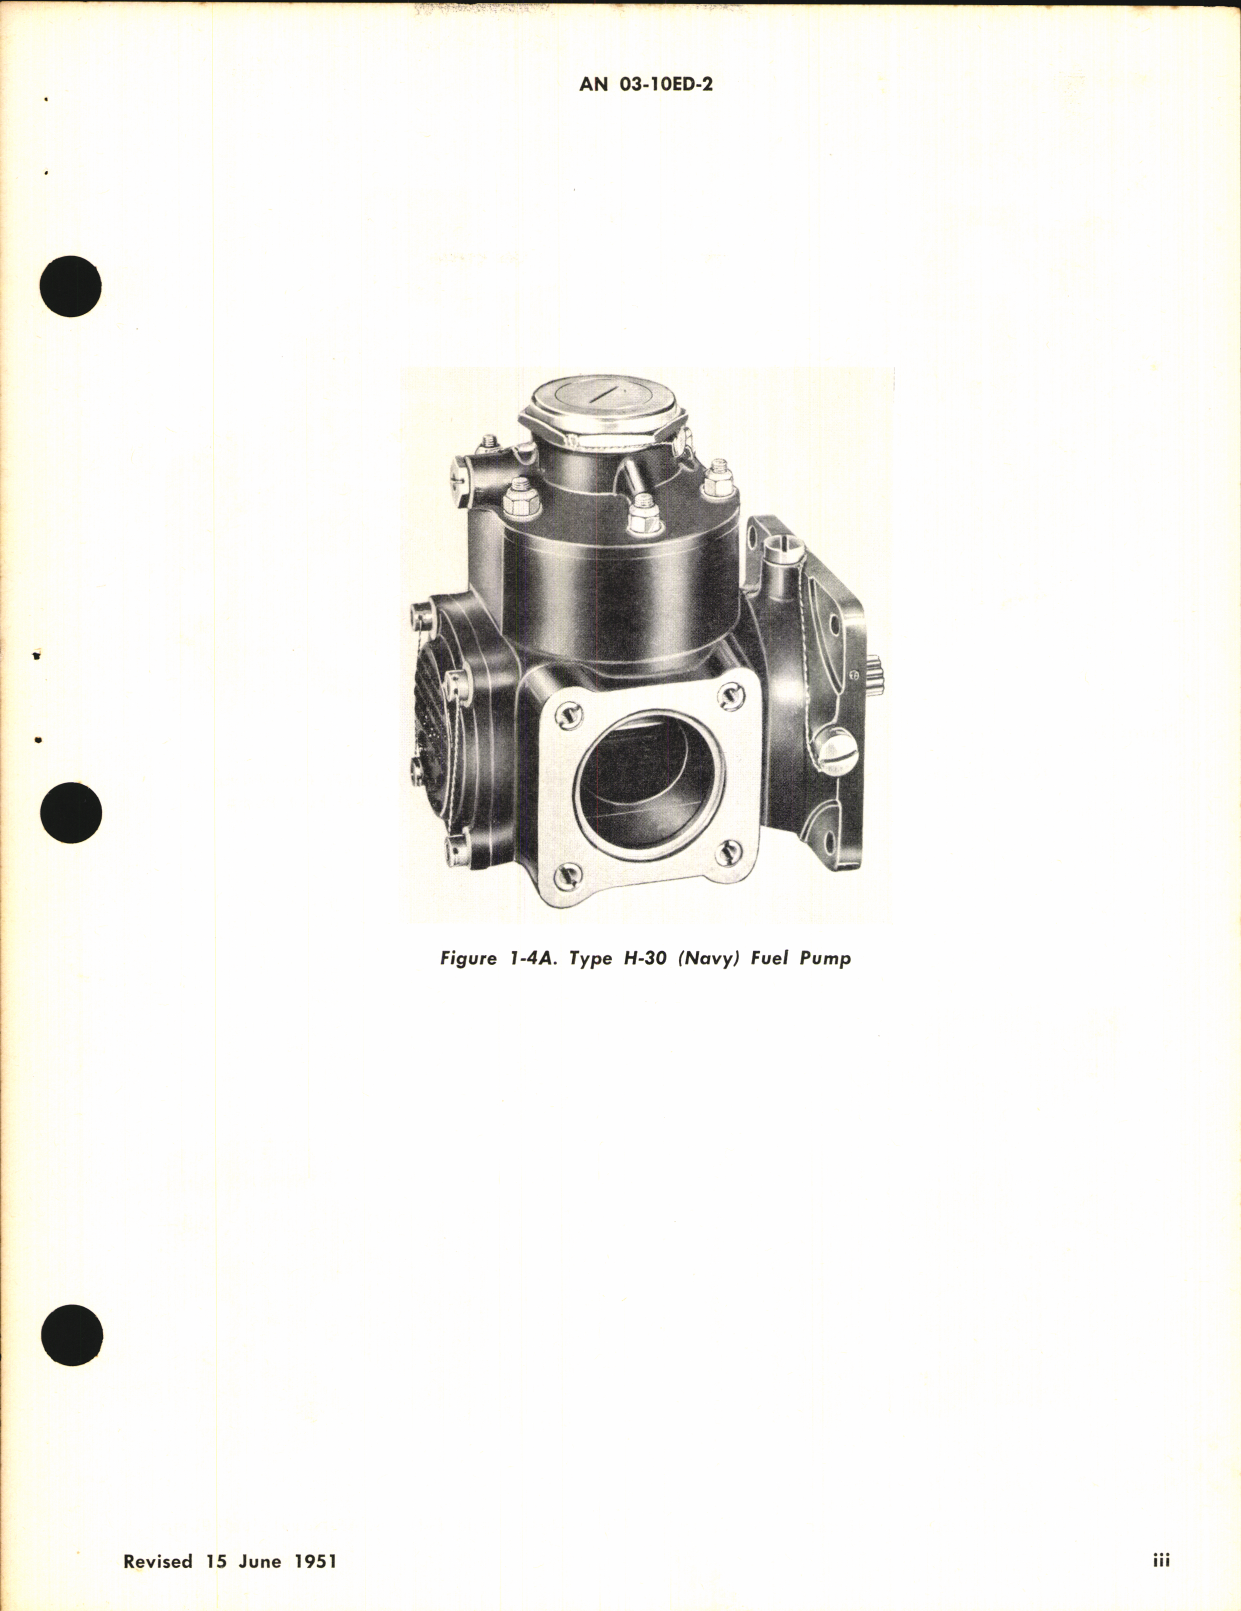 Sample page 5 from AirCorps Library document: Overhaul Instructions for Fuel and Water Pumps